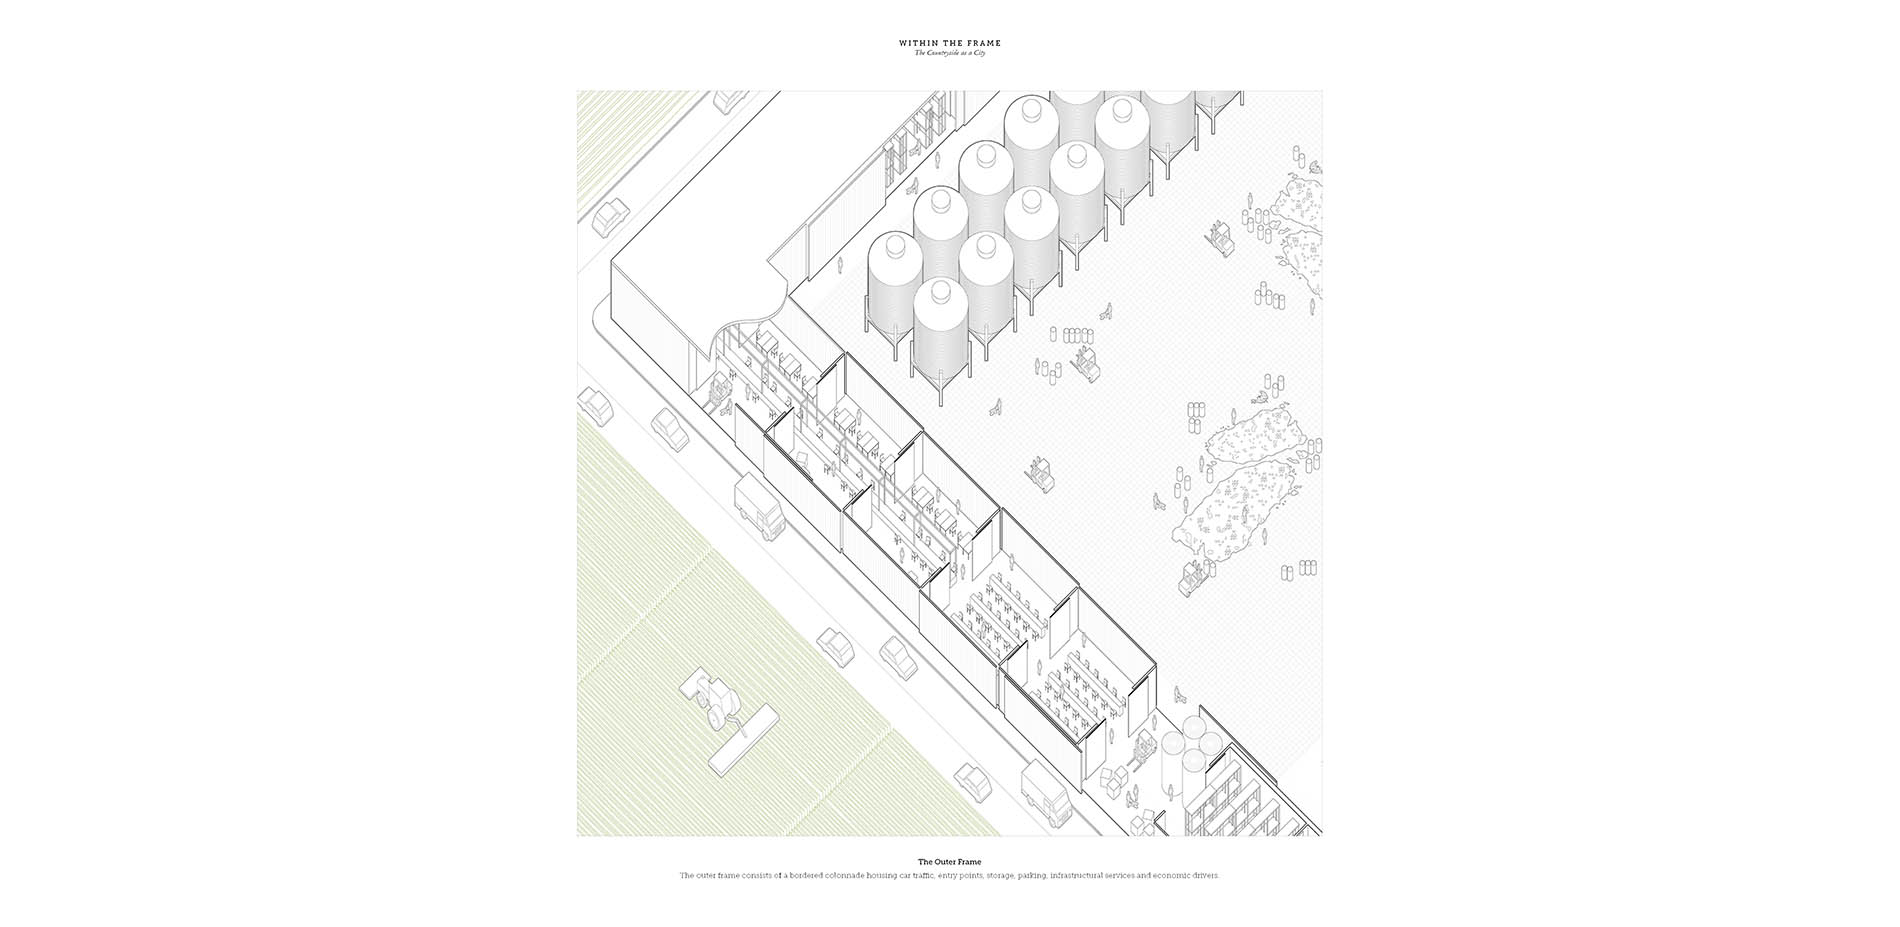 Within the Frame: The Countryside as a City | 2015 ASLA Student Awards